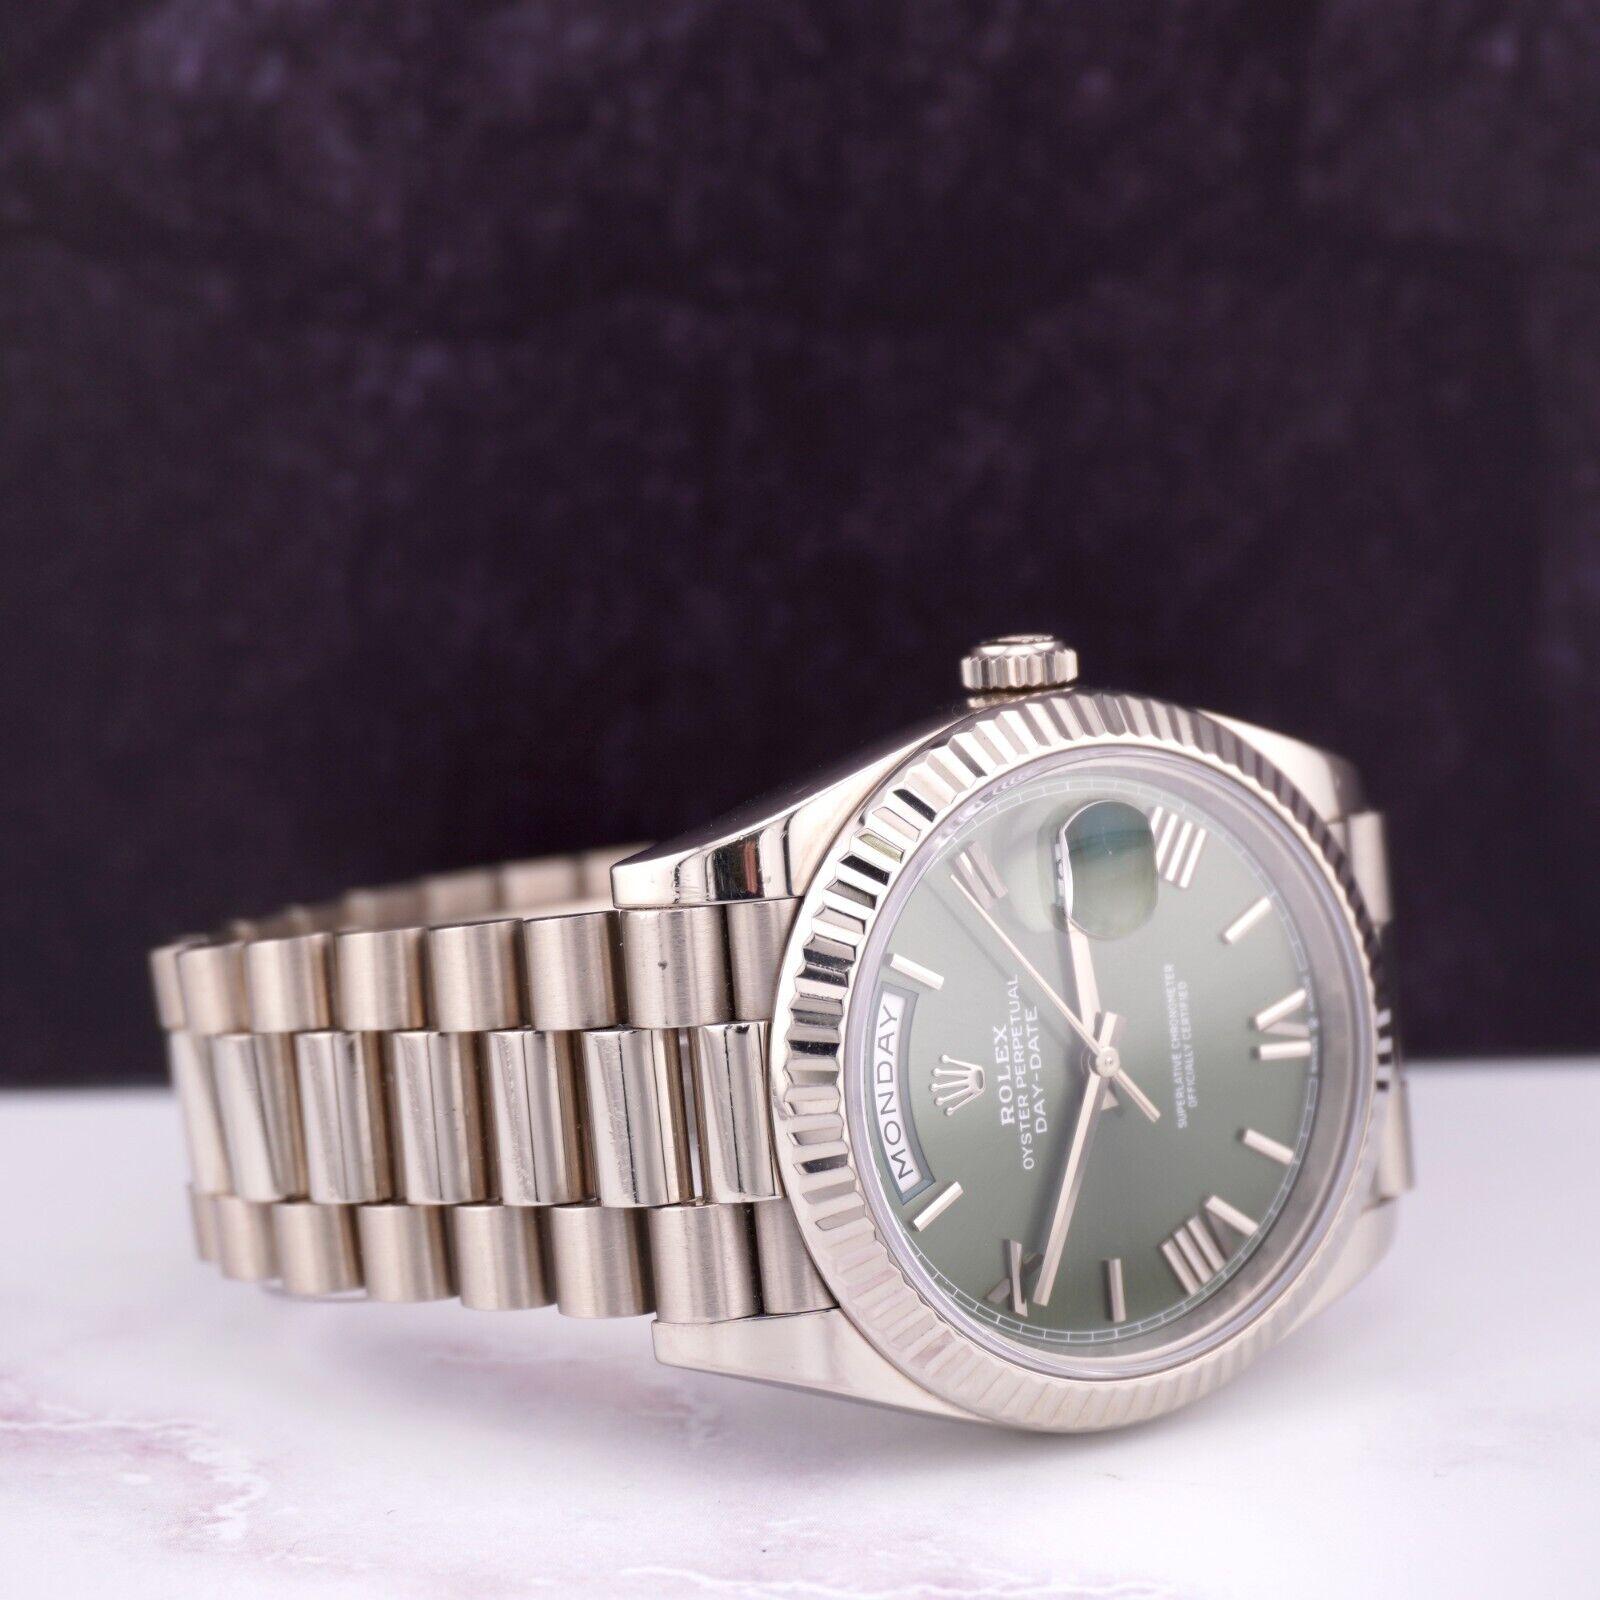 Rolex Day-Date 40 President 18k White Gold Men's Watch Olive Green DIAL 228239 In Excellent Condition For Sale In Pleasanton, CA